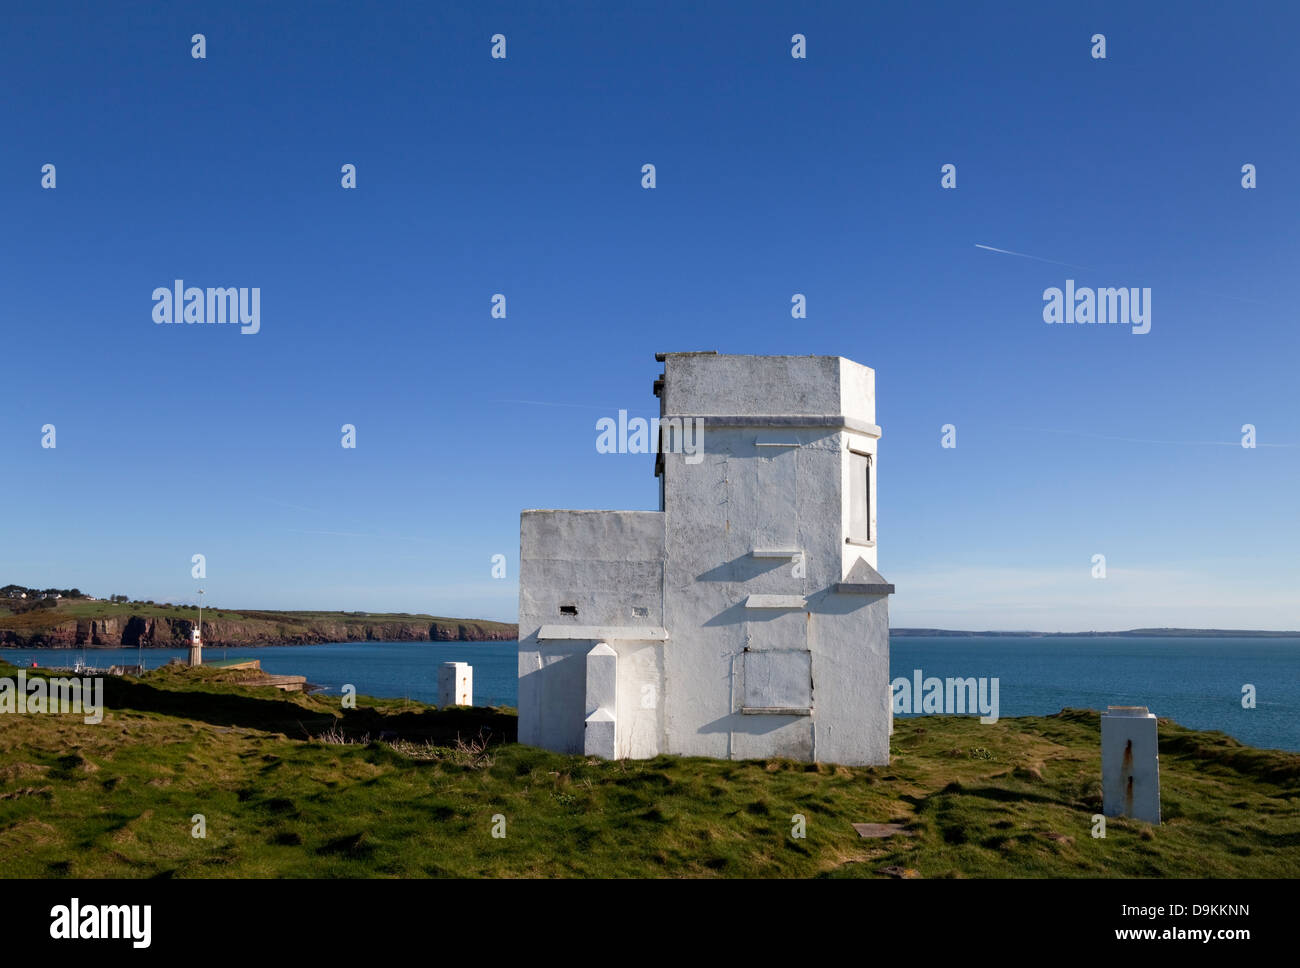 The Old Coastguard Station, Dunmore East Fishing Port, County Waterford, Ireland Stock Photo